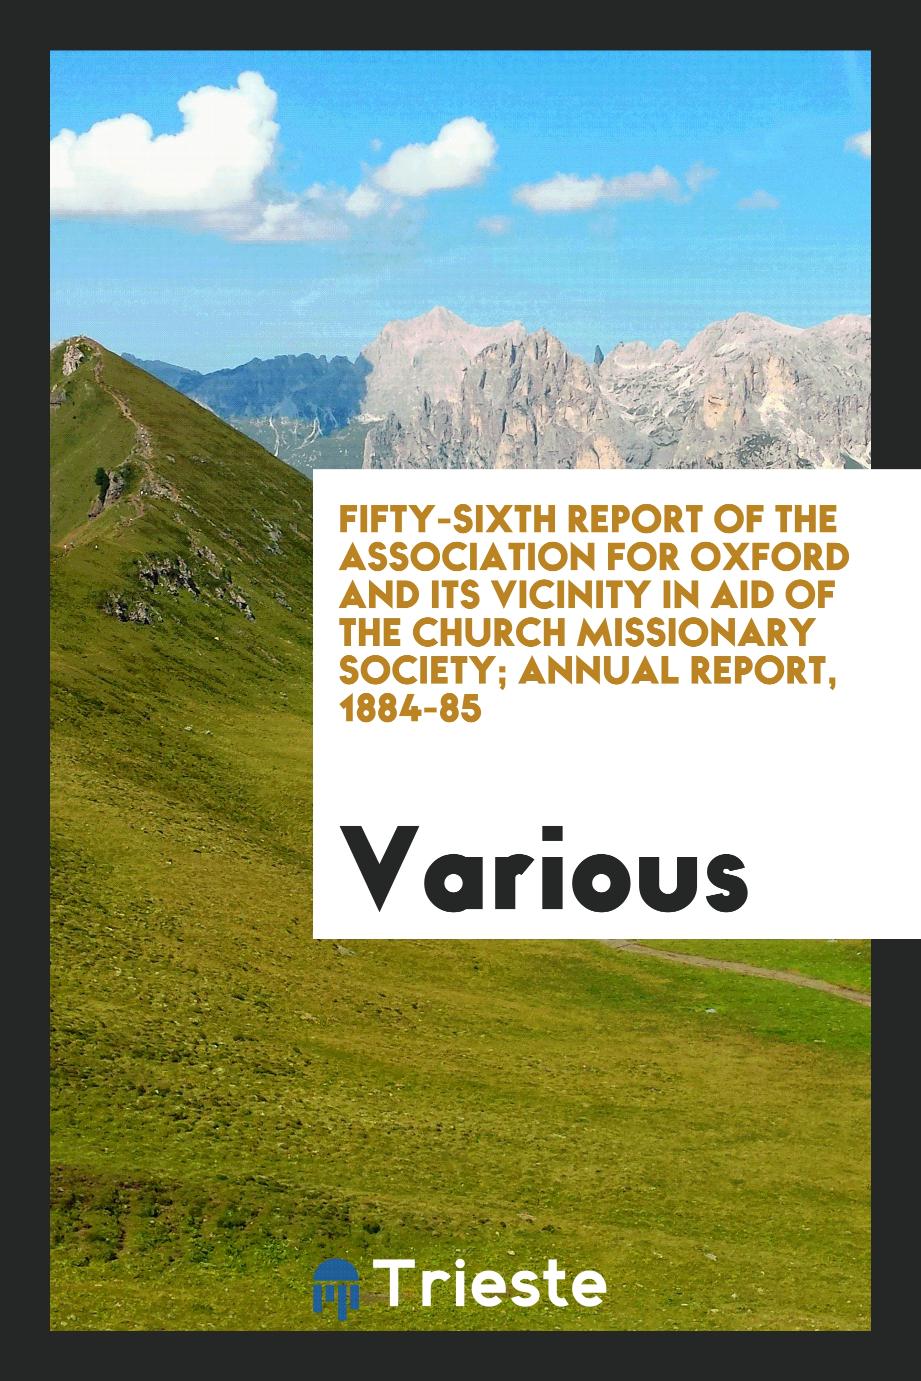 Fifty-Sixth report of the Association for Oxford and its vicinity in aid of the Church Missionary Society; Annual Report, 1884-85